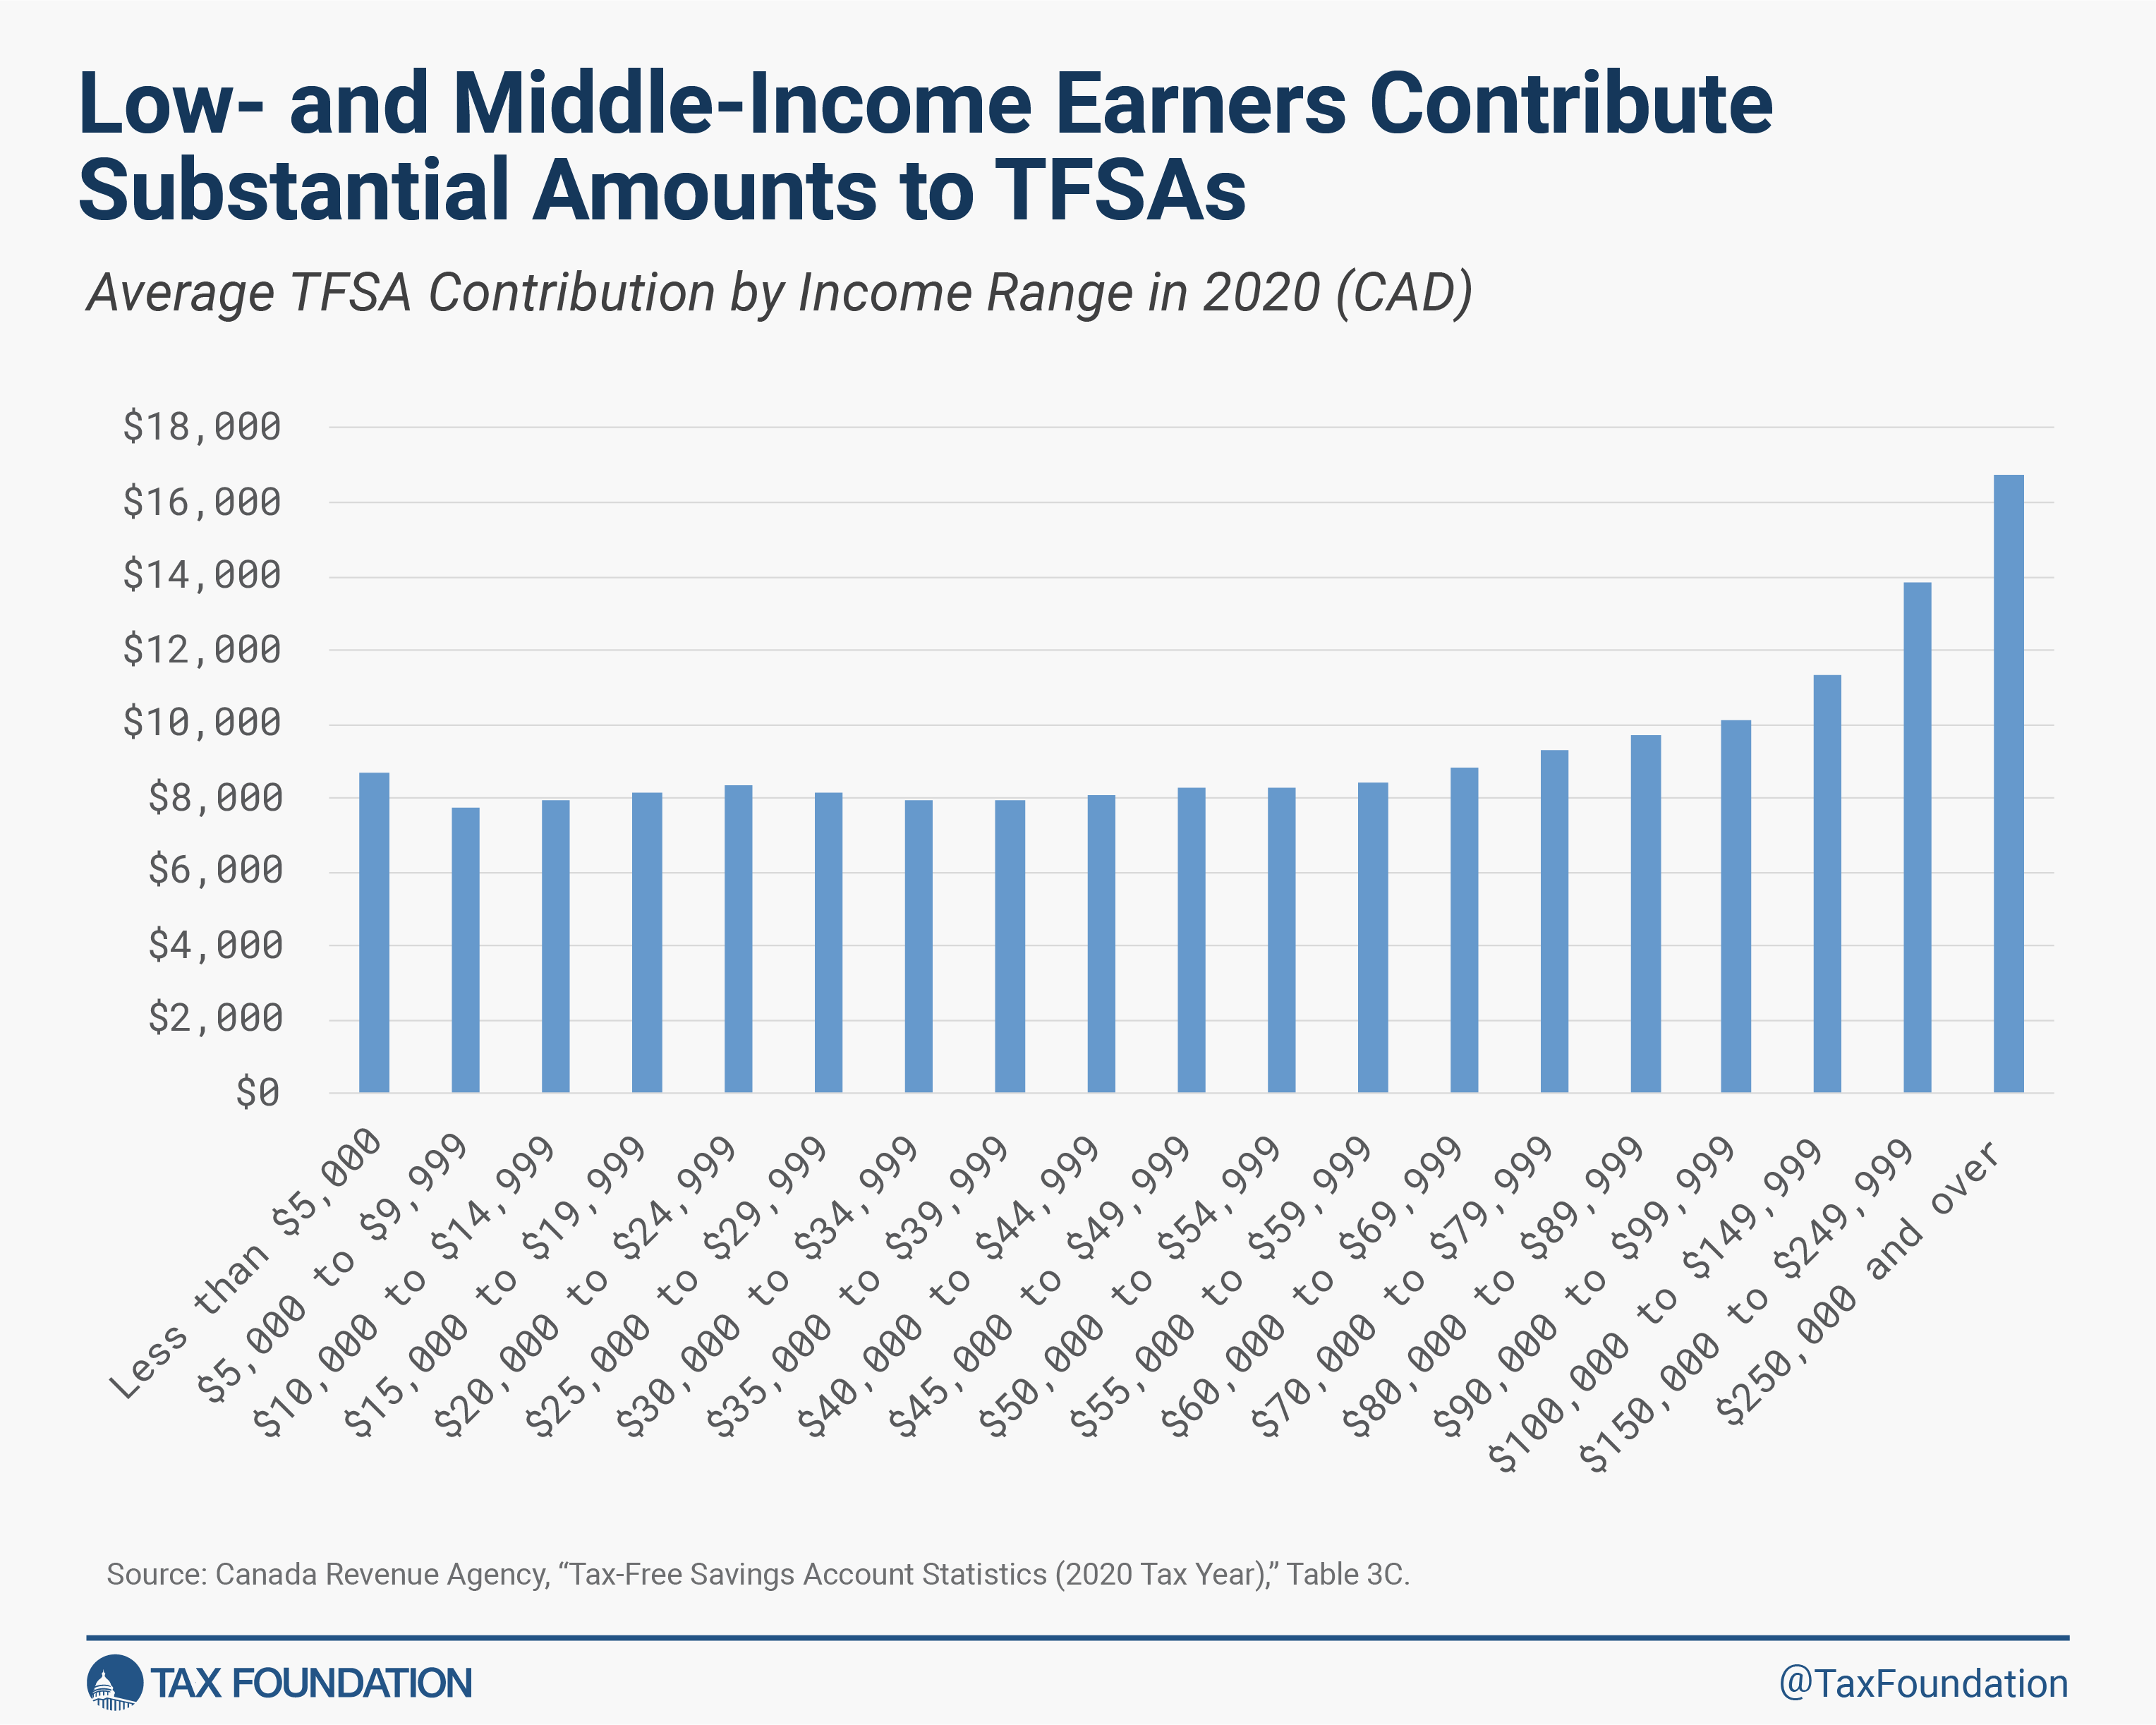 low and middle income earners contribute substantial amounts to TFSA accounts